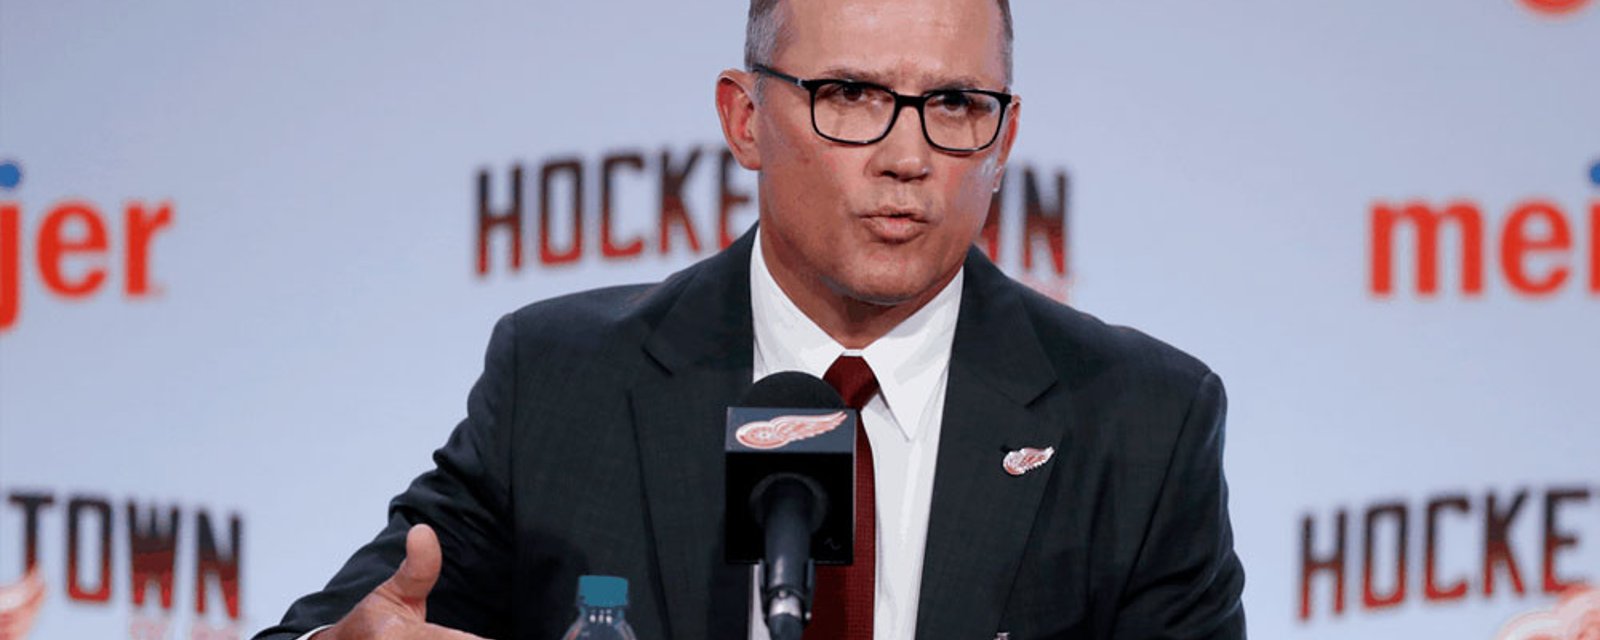 Yzerman reportedly hires NCAA coach and is “completely revamping” Red Wings’ staff